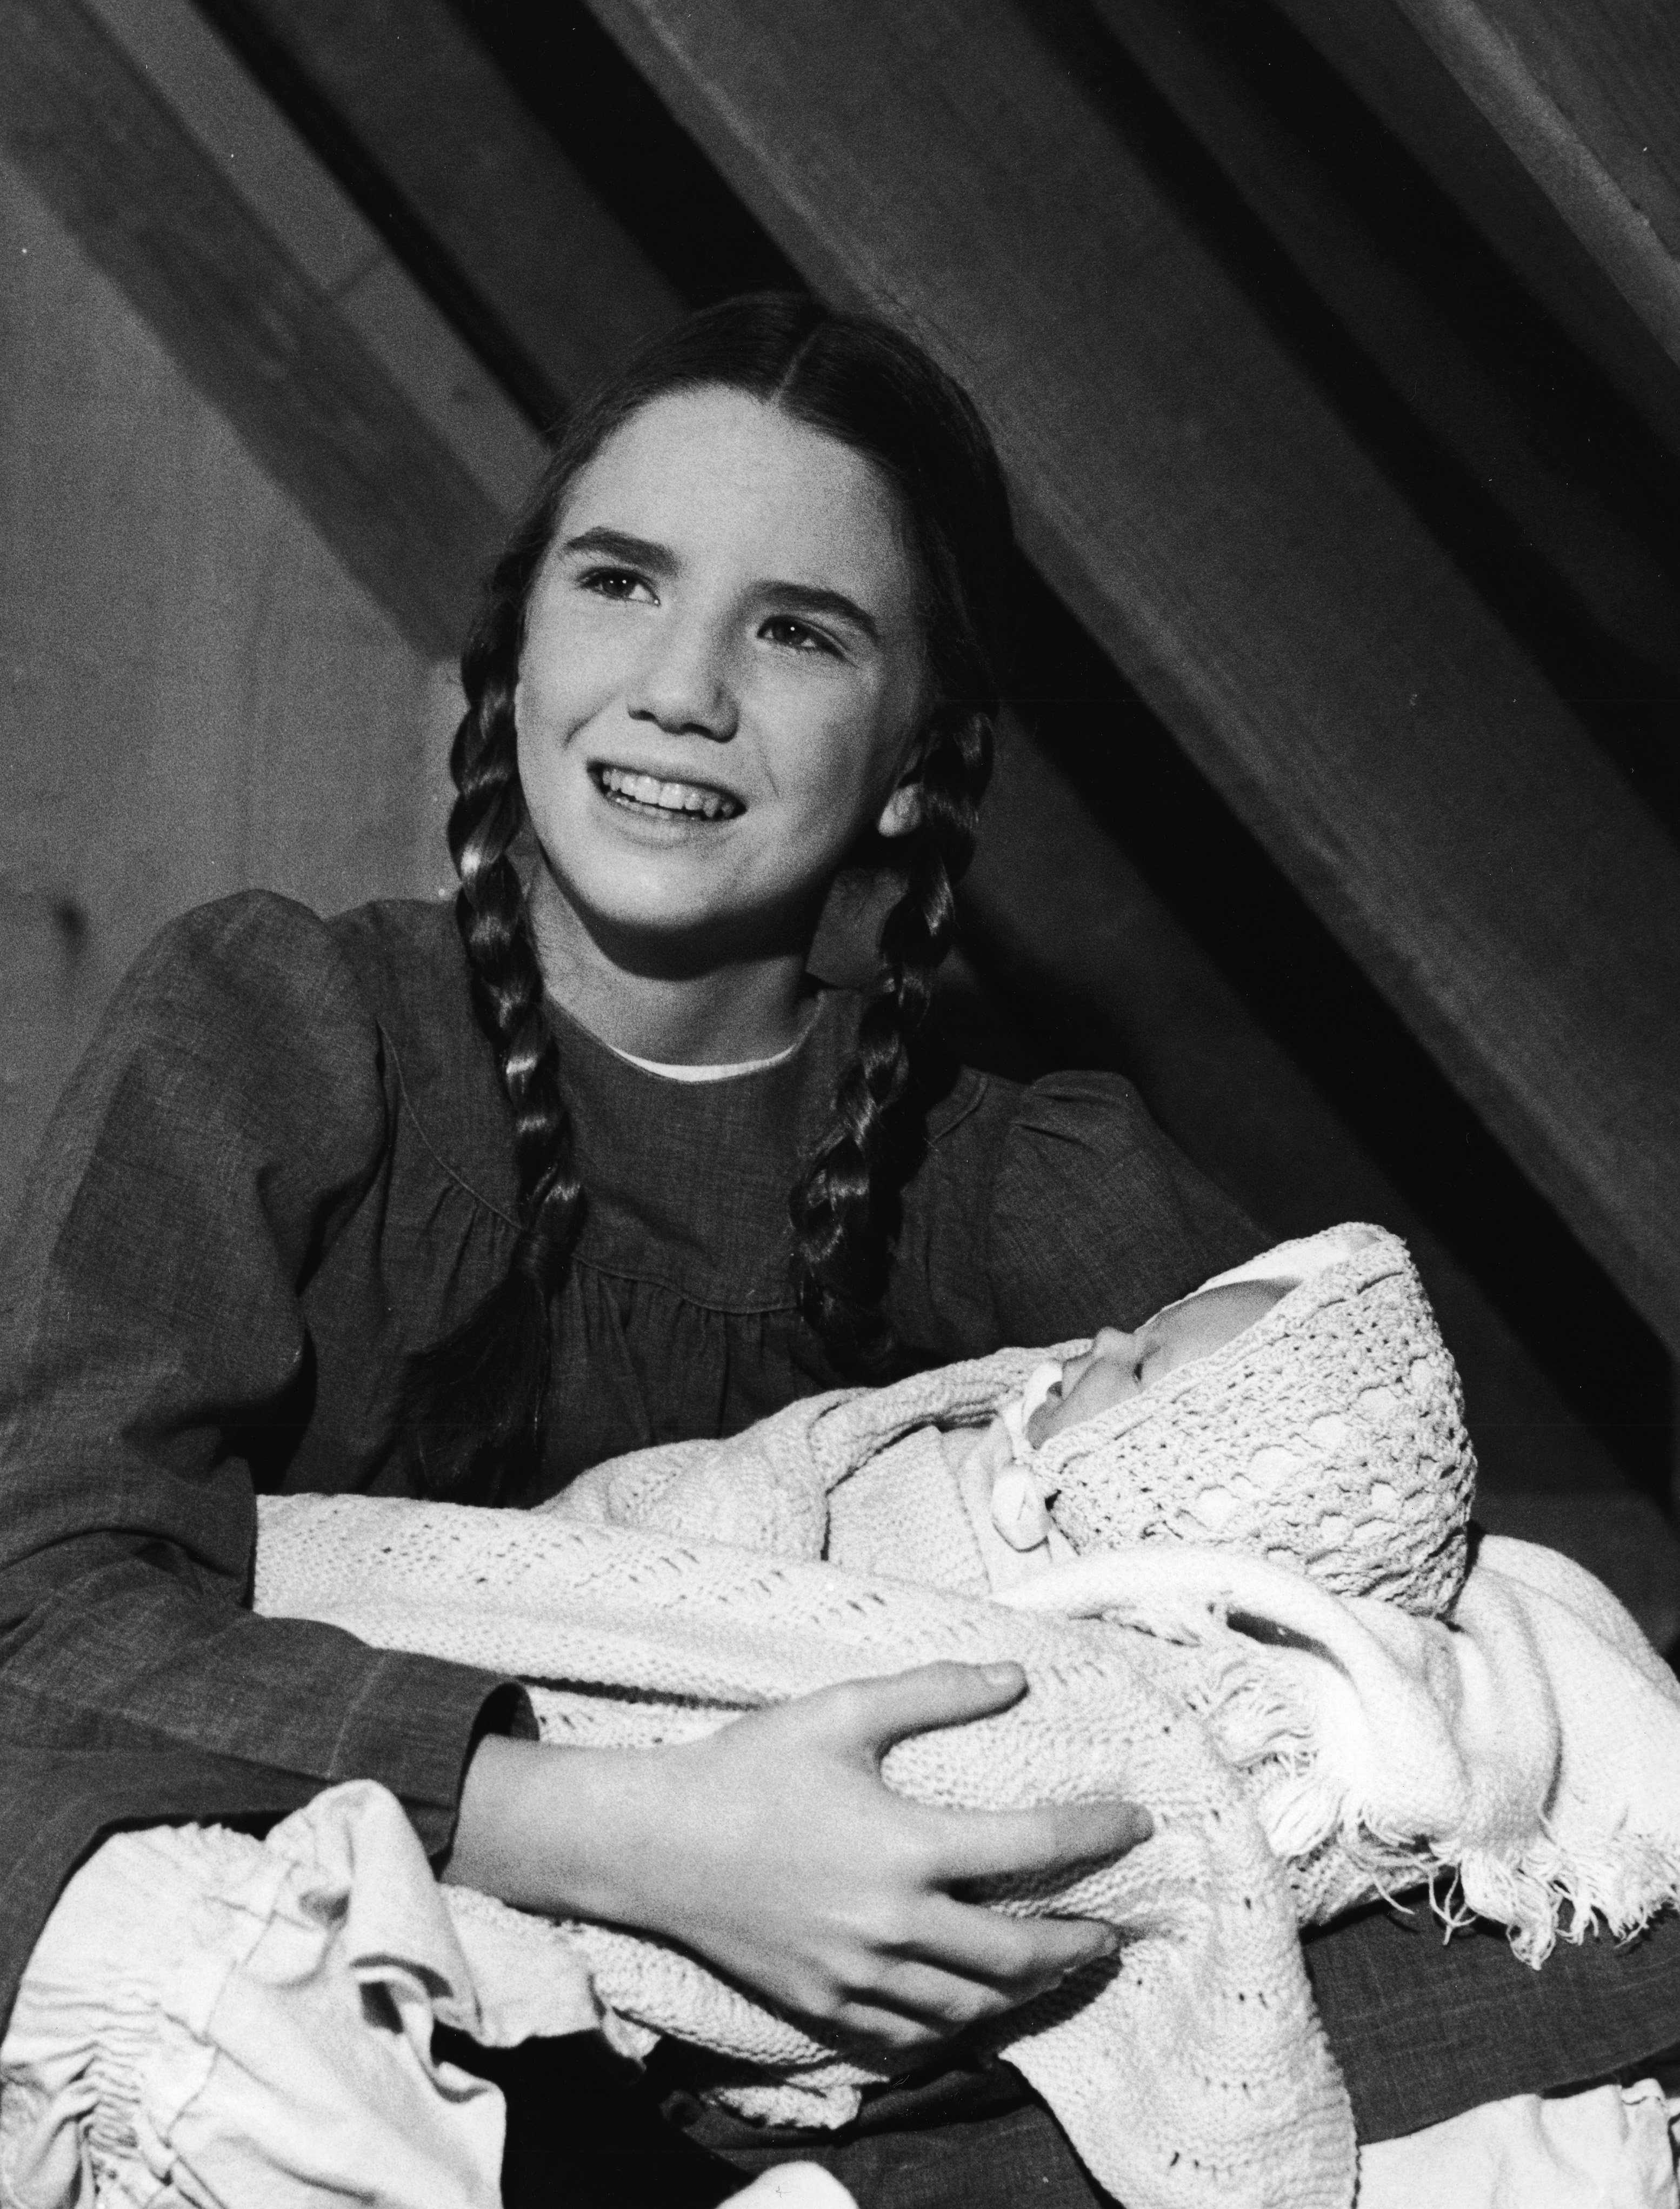  Melissa Gilbert as Laura Ingalls in a scene from "Little House on the Prairie," 1978 | Photo: GettyImages